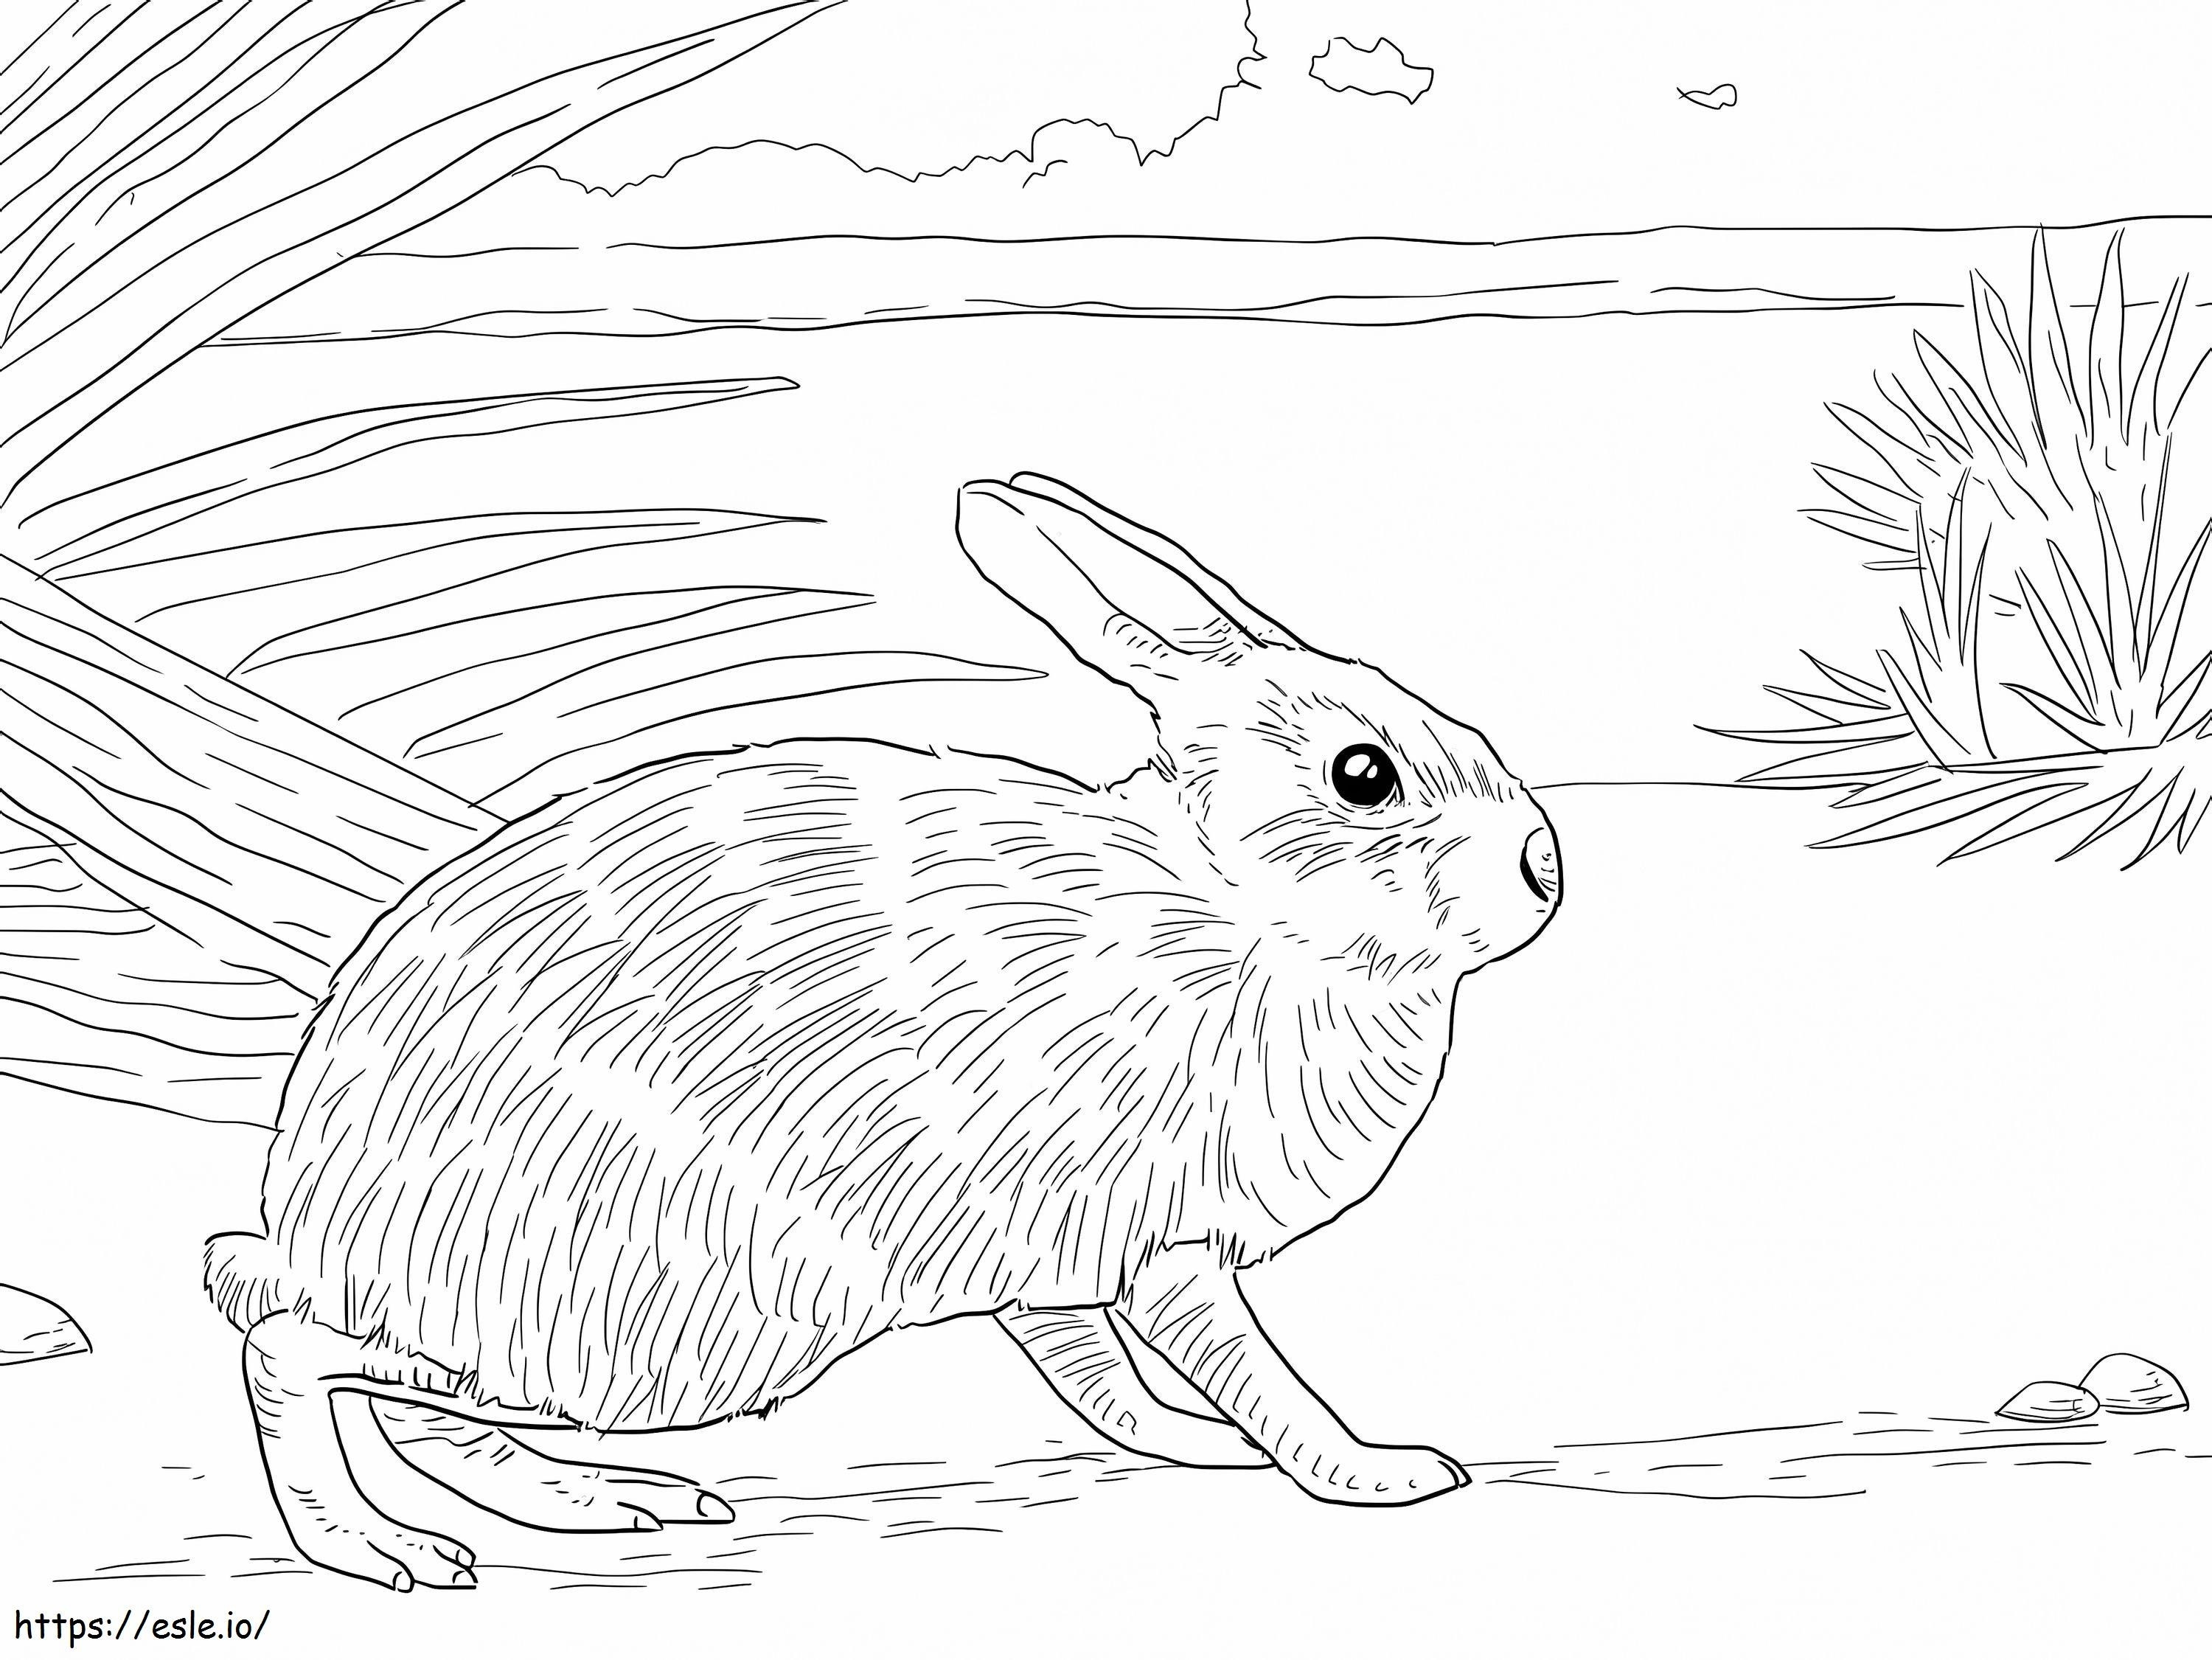 Swamp Rabbit coloring page